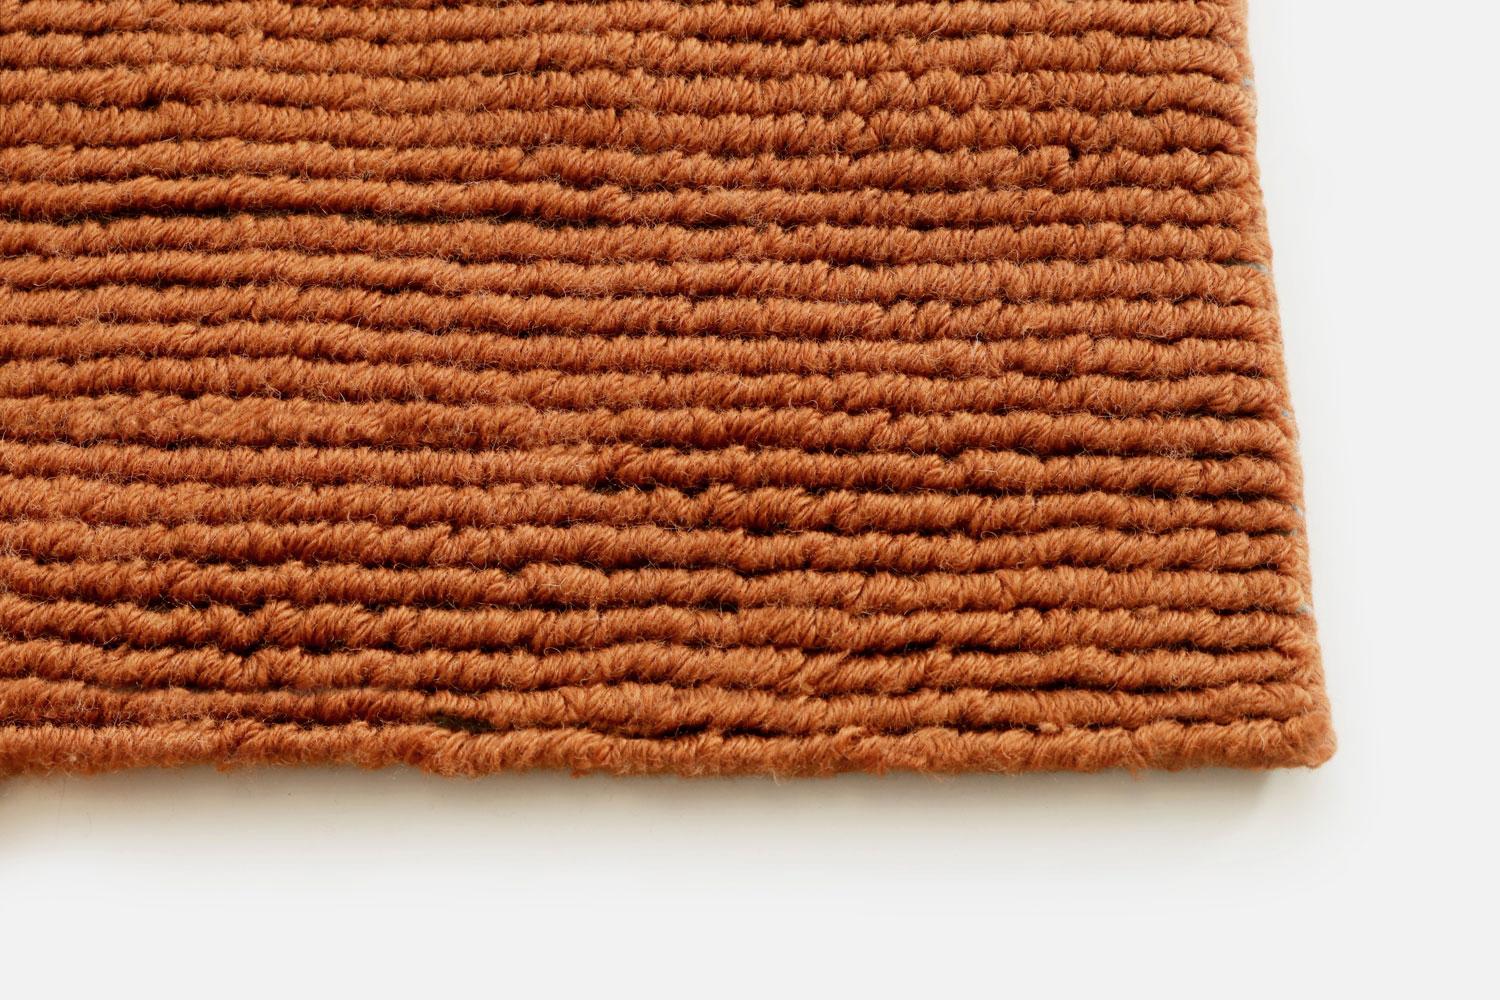 Contemporary Soft Orange Pure Wool Rug by Deanna Comellini In Stock 170x240 cm In New Condition For Sale In Bologna, IT